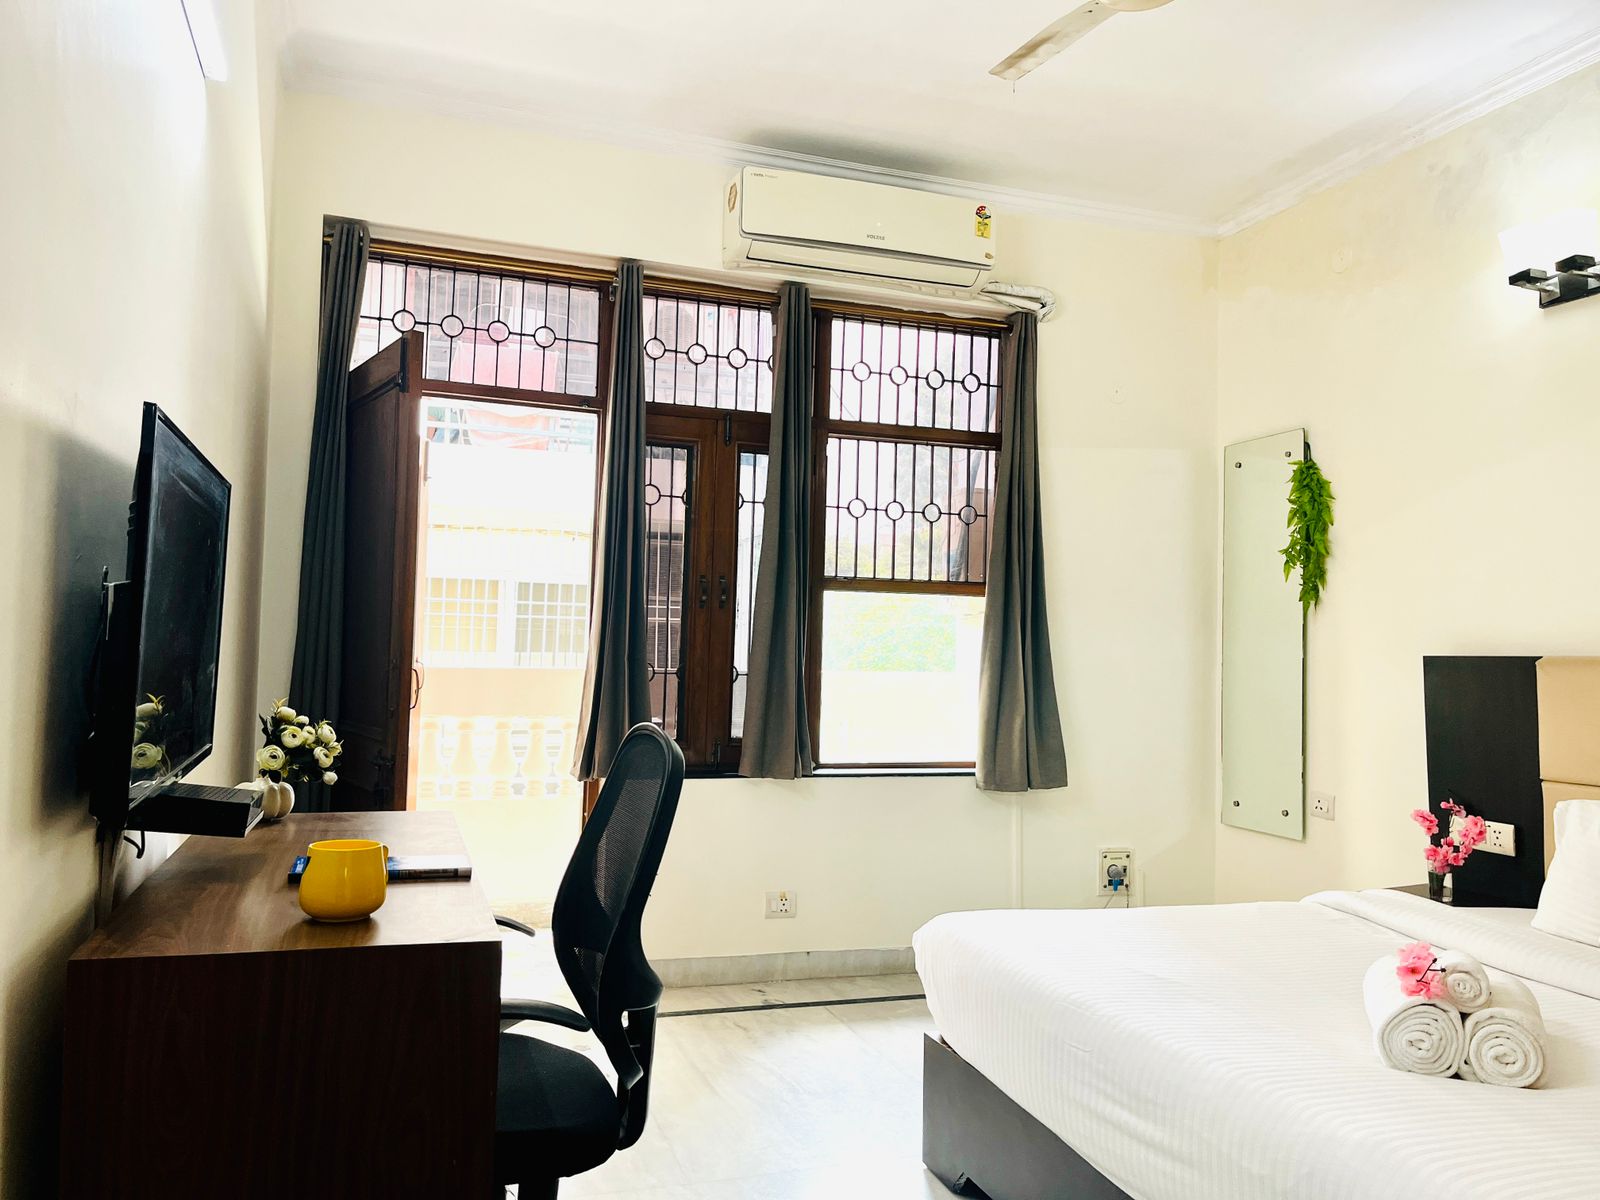 Service Apartments In Kolkata: A great option for next vacation